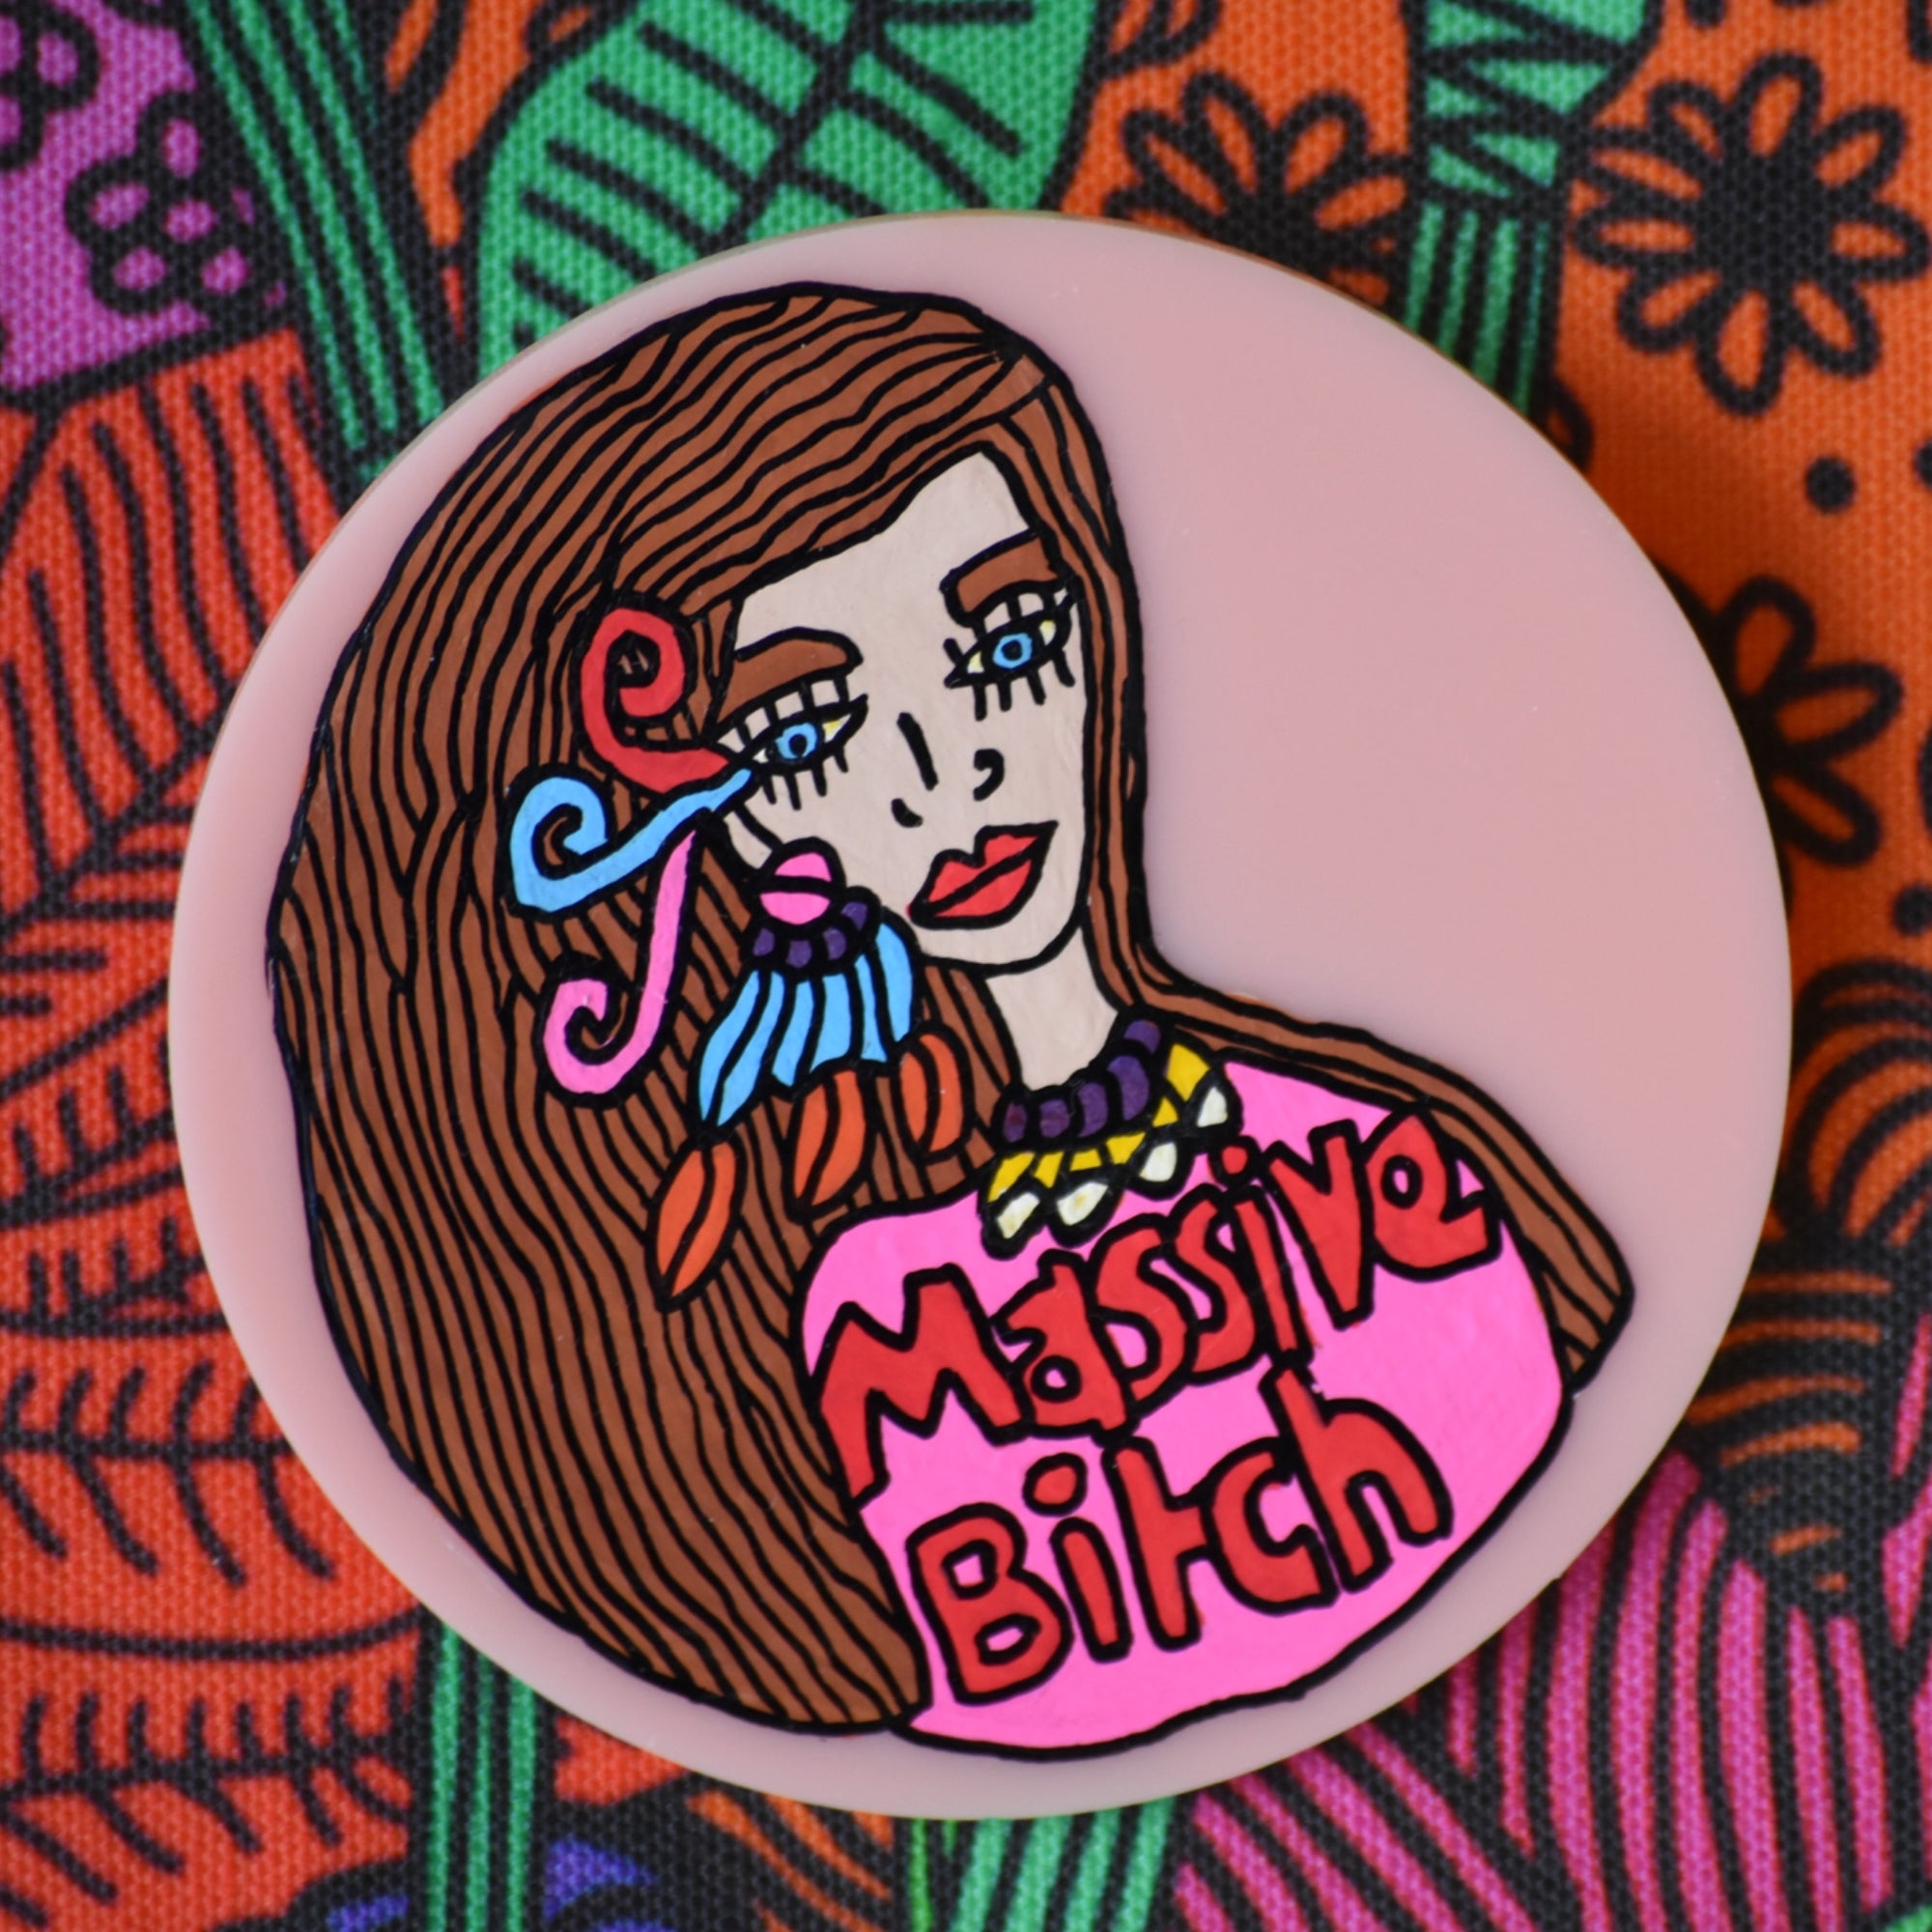 OOAK hand painted brooch saying Massive Bitch by Antayjo Art